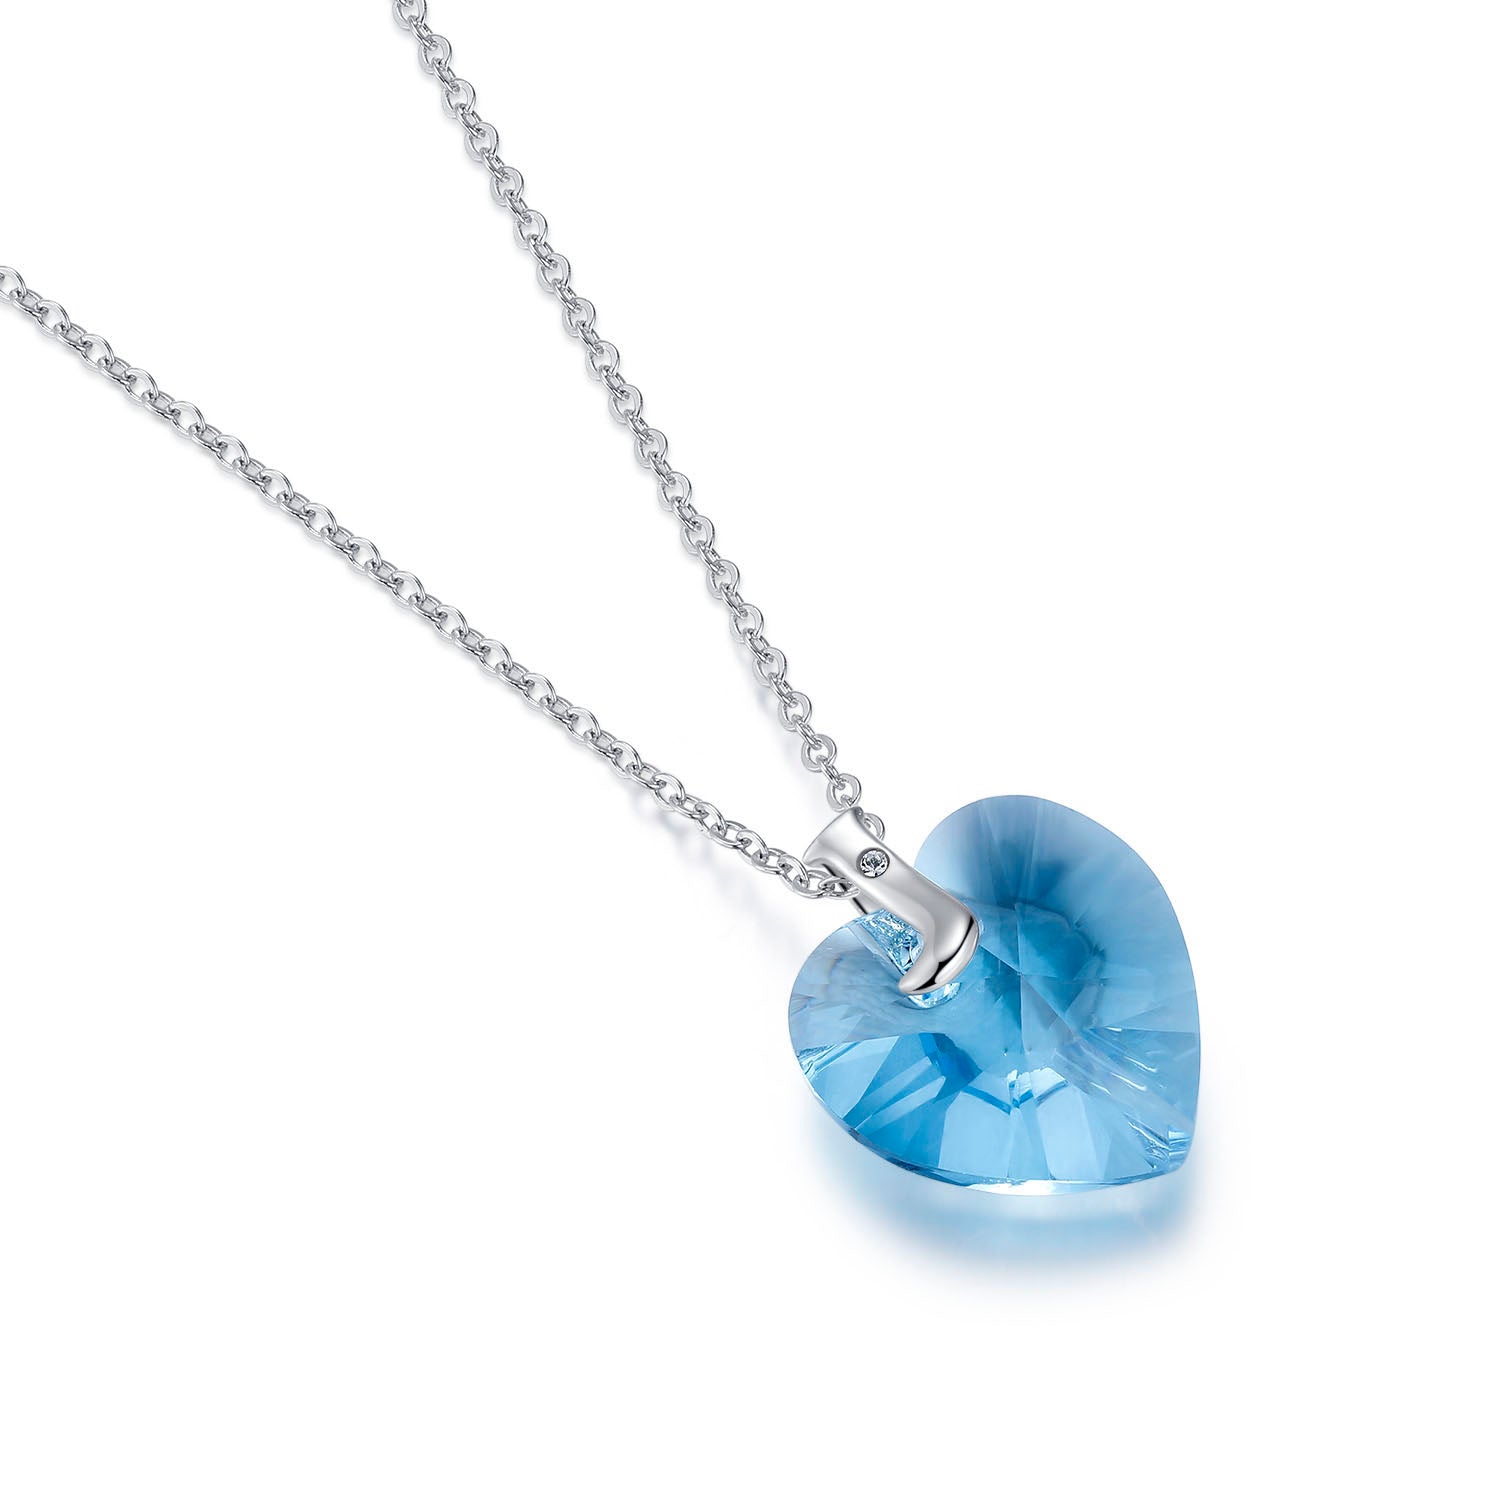 Planet J 925 Sterling Silver Blue Heart Pendant Necklace with Swarovski Elements Crystals